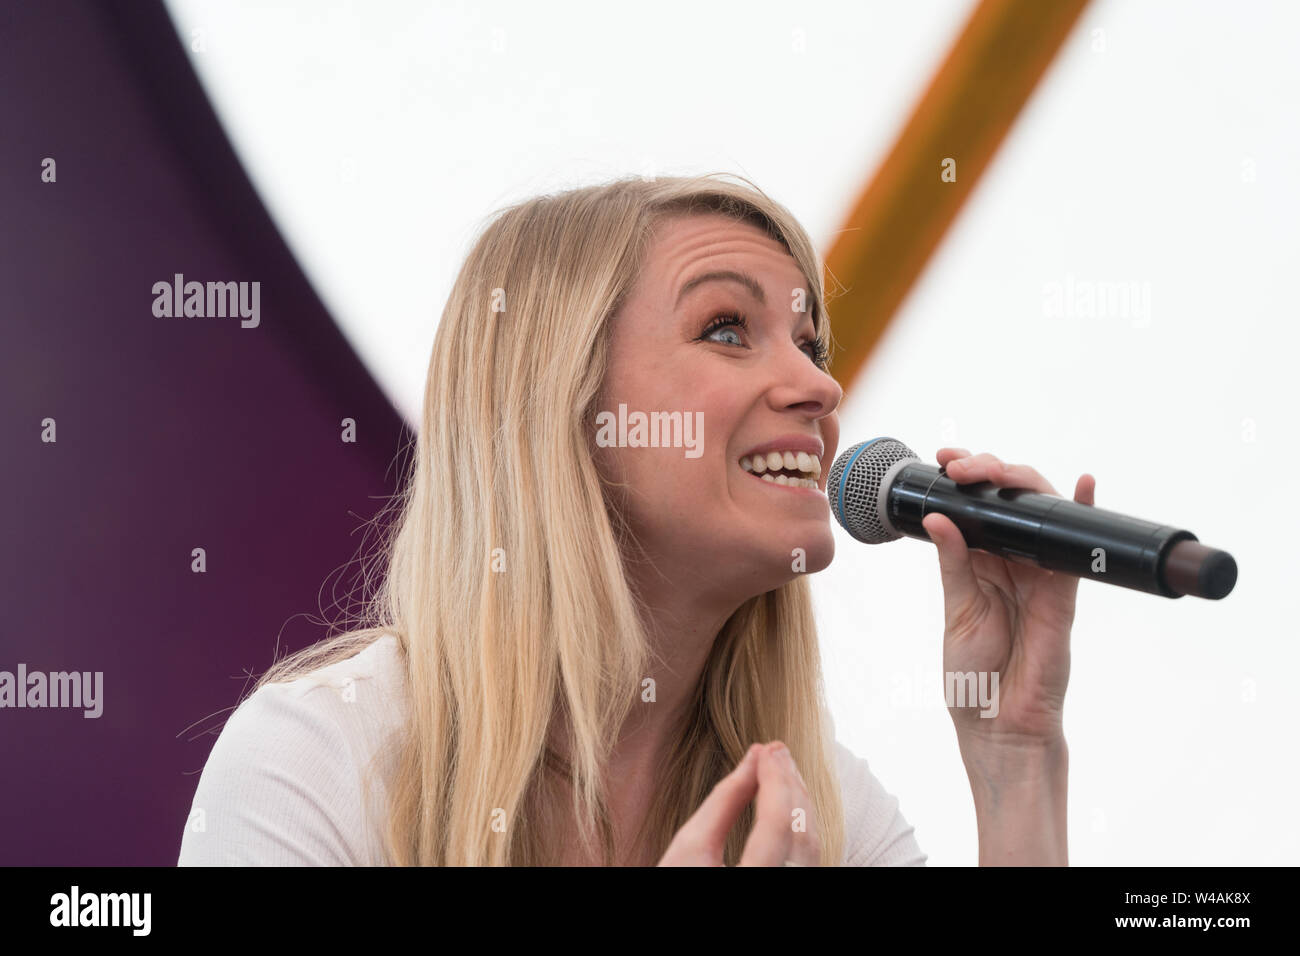 Suffolk, UK. Sunday, 21 July, 2019. Rachel Parris performing live on the comedy stage on Day 3 of the 2019 Latitude Festival. Photo: Roger Garfield/Alamy Live News Stock Photo